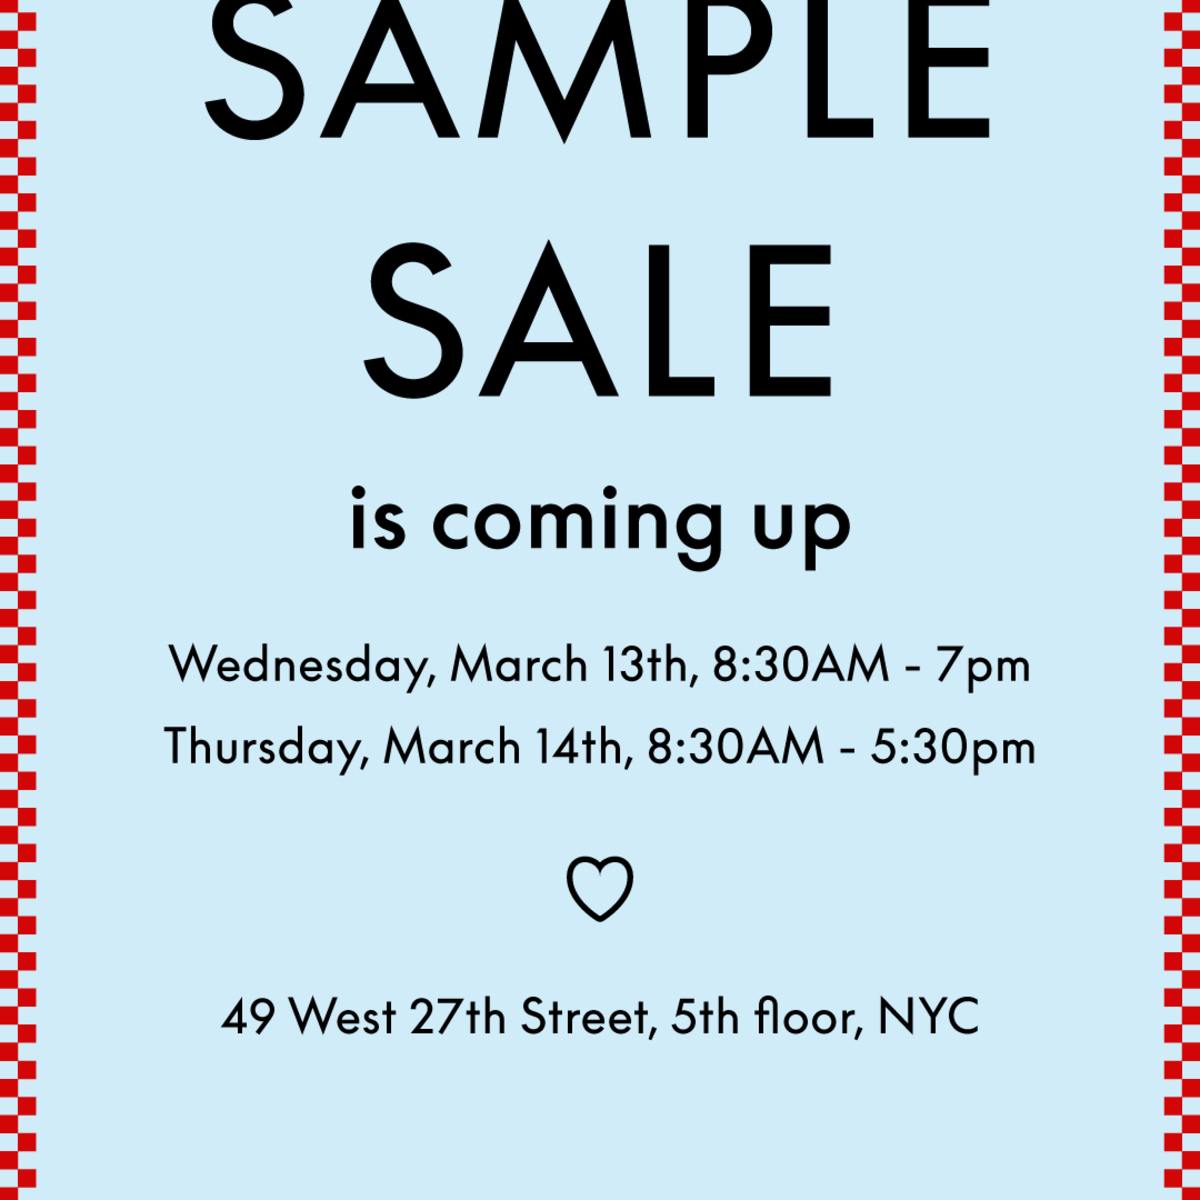 What is a sample sale?